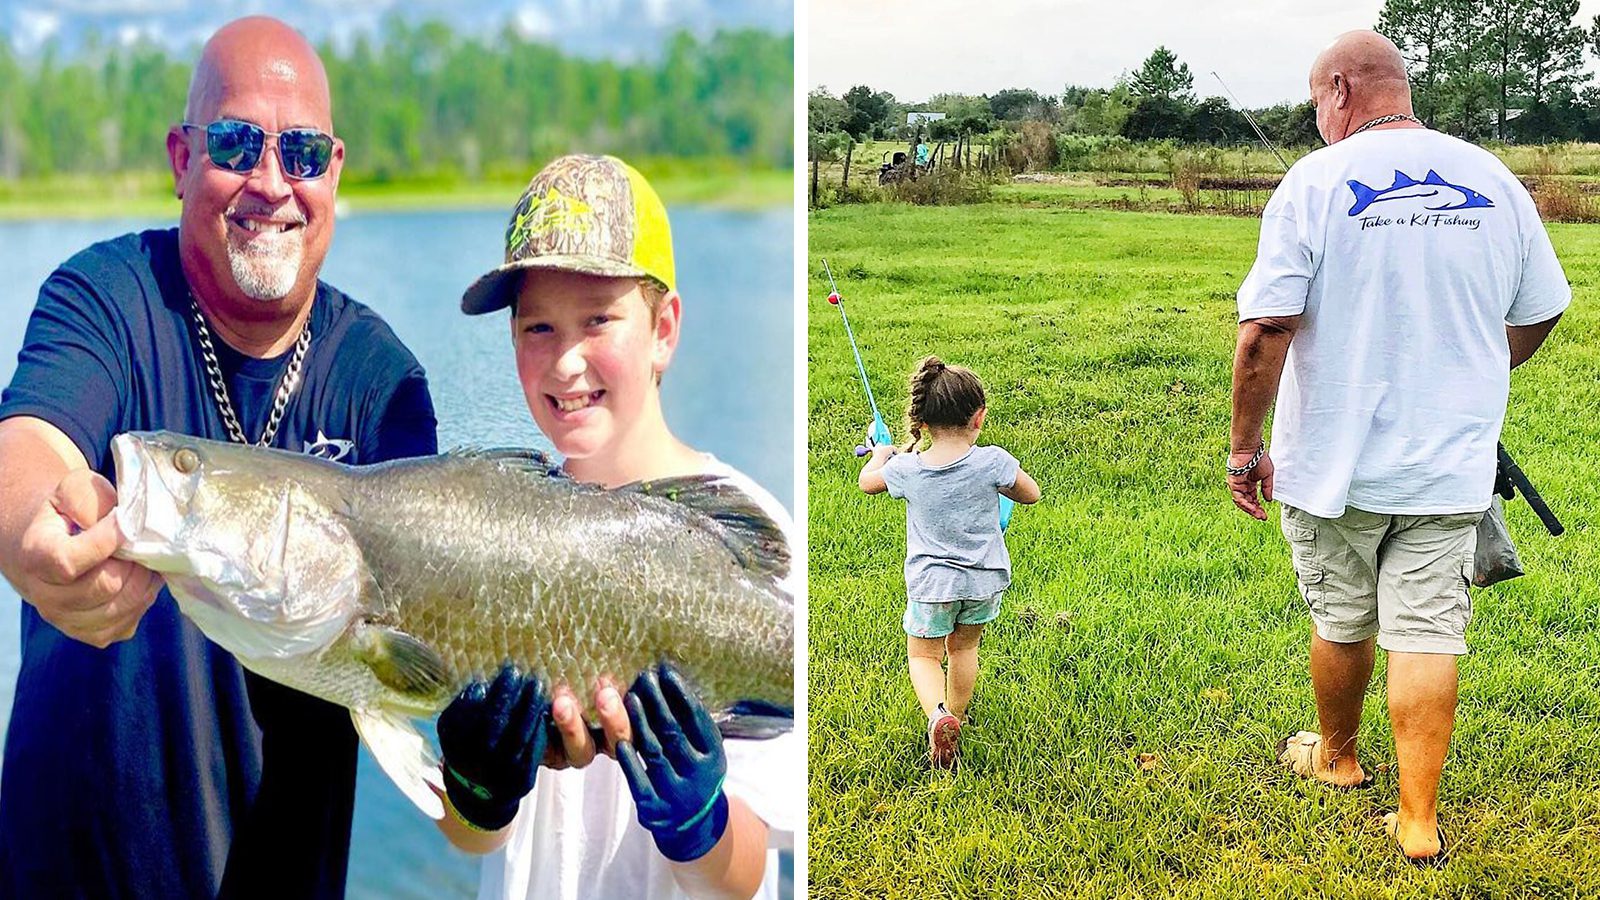 Man Becomes a Father Figure in His Community, Takes Kids Fishing 